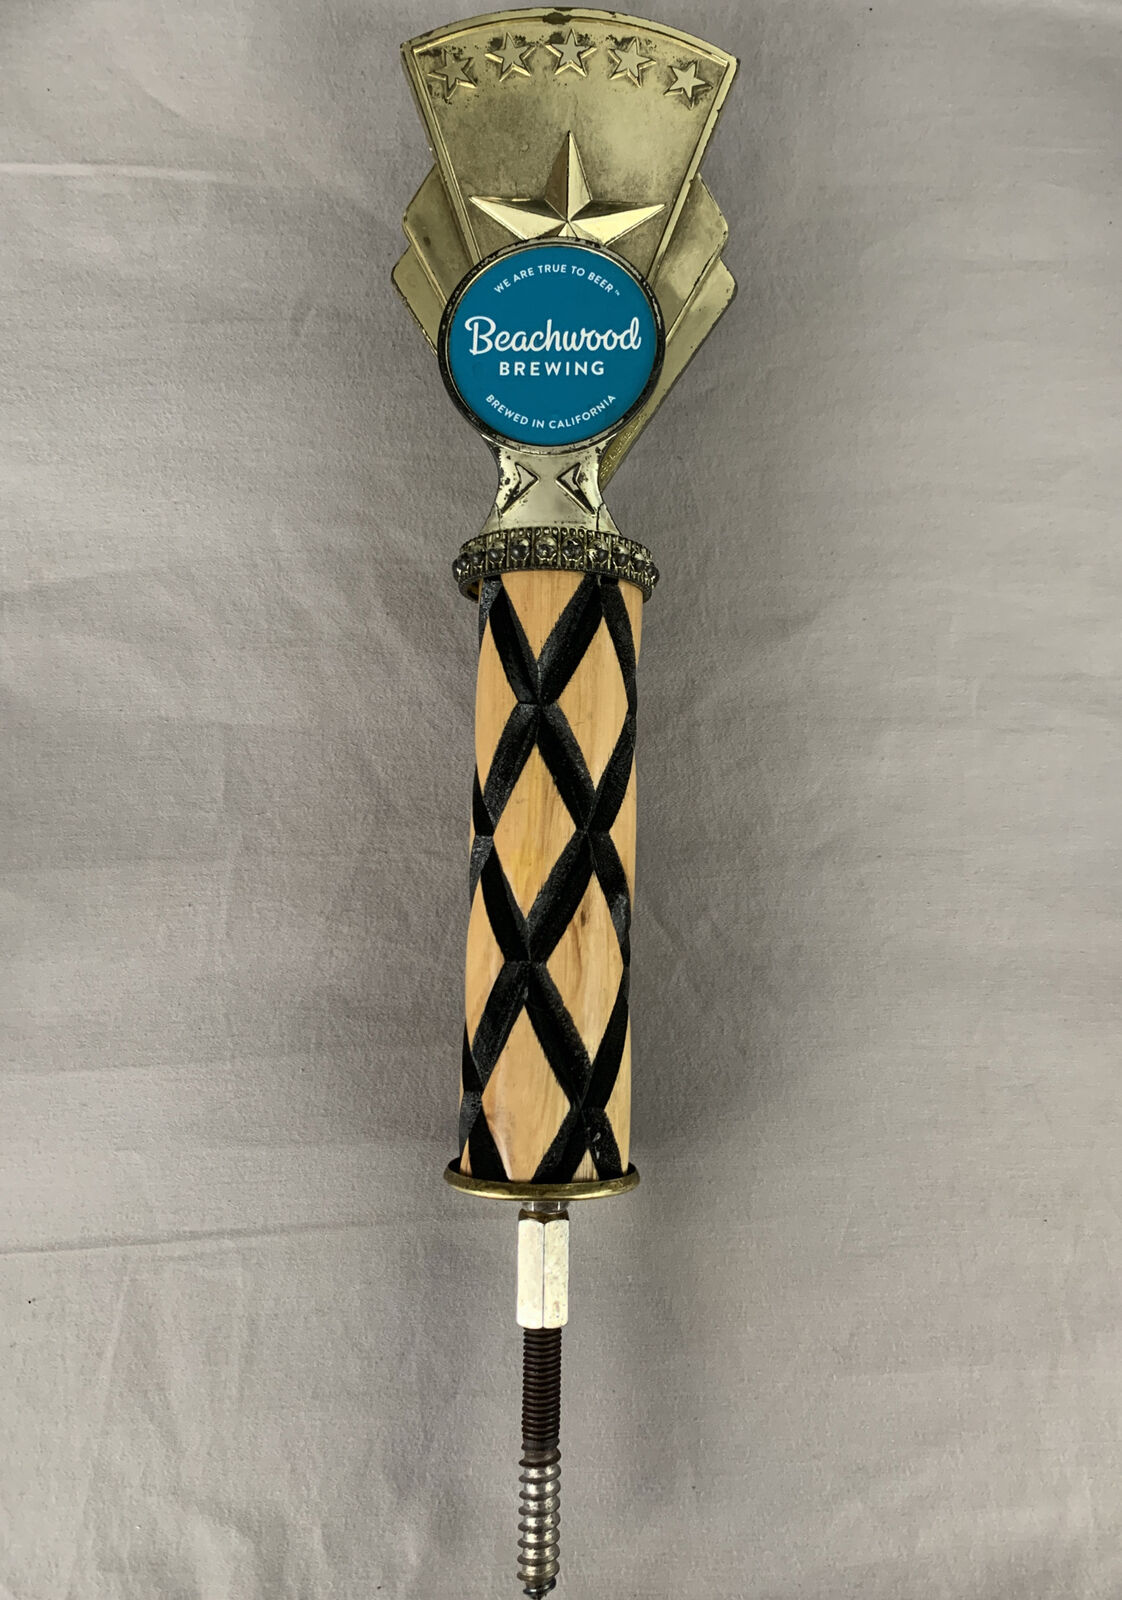 Rare Beachwood Brewing Co Company California Trophy Brewery Bar Beer Tap Handle